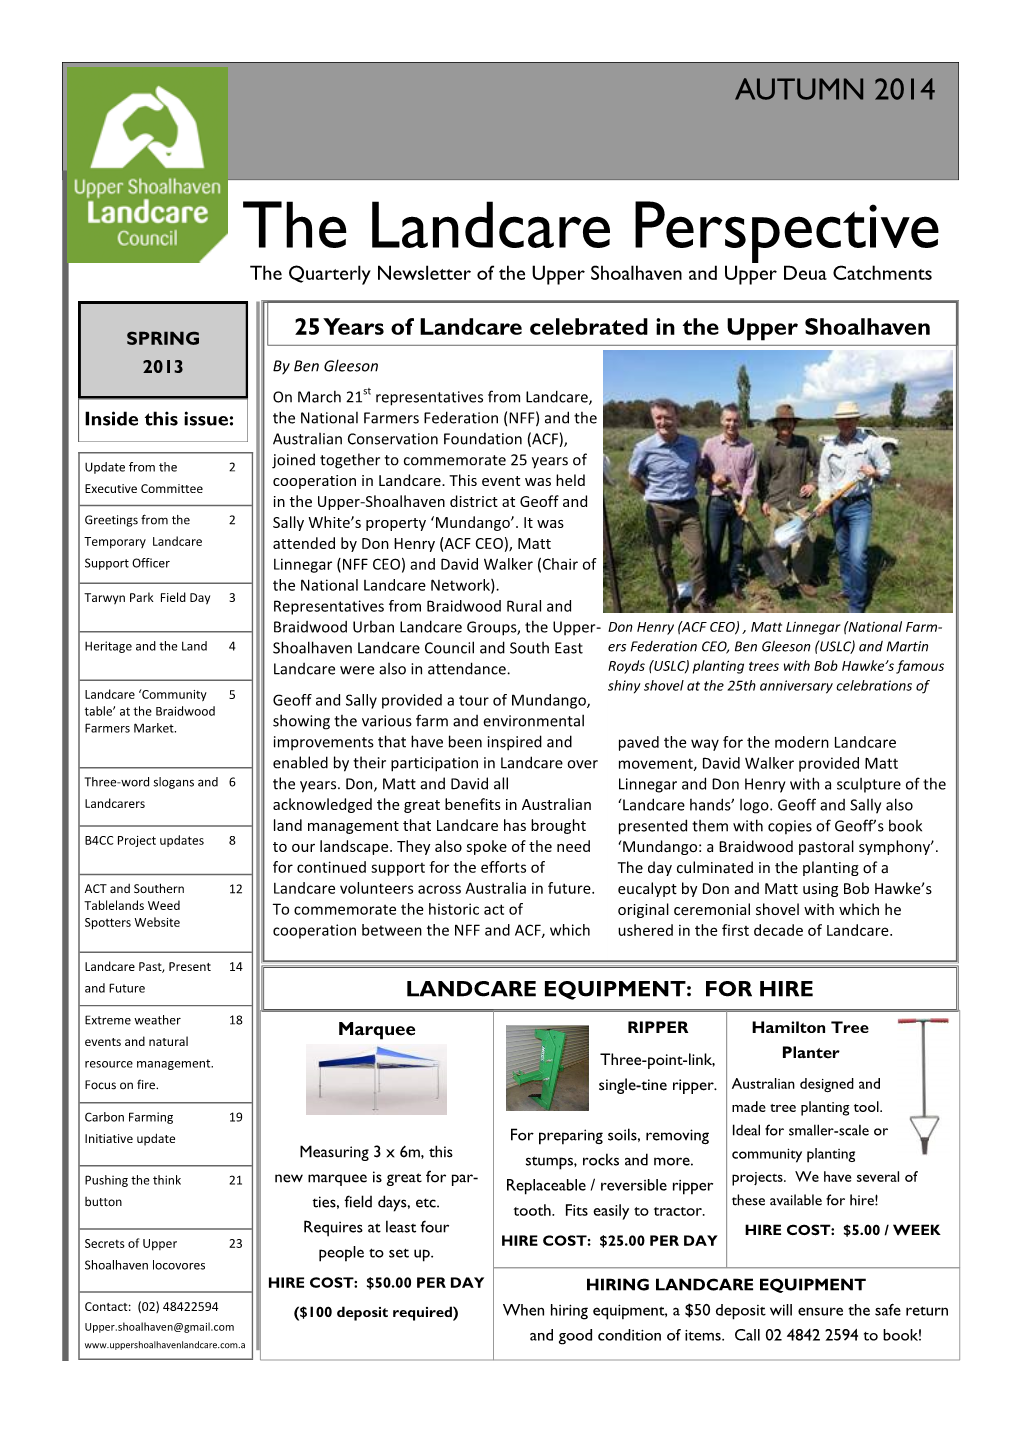 The Landcare Perspective the Quarterly Newsletter of the Upper Shoalhaven and Upper Deua Catchments